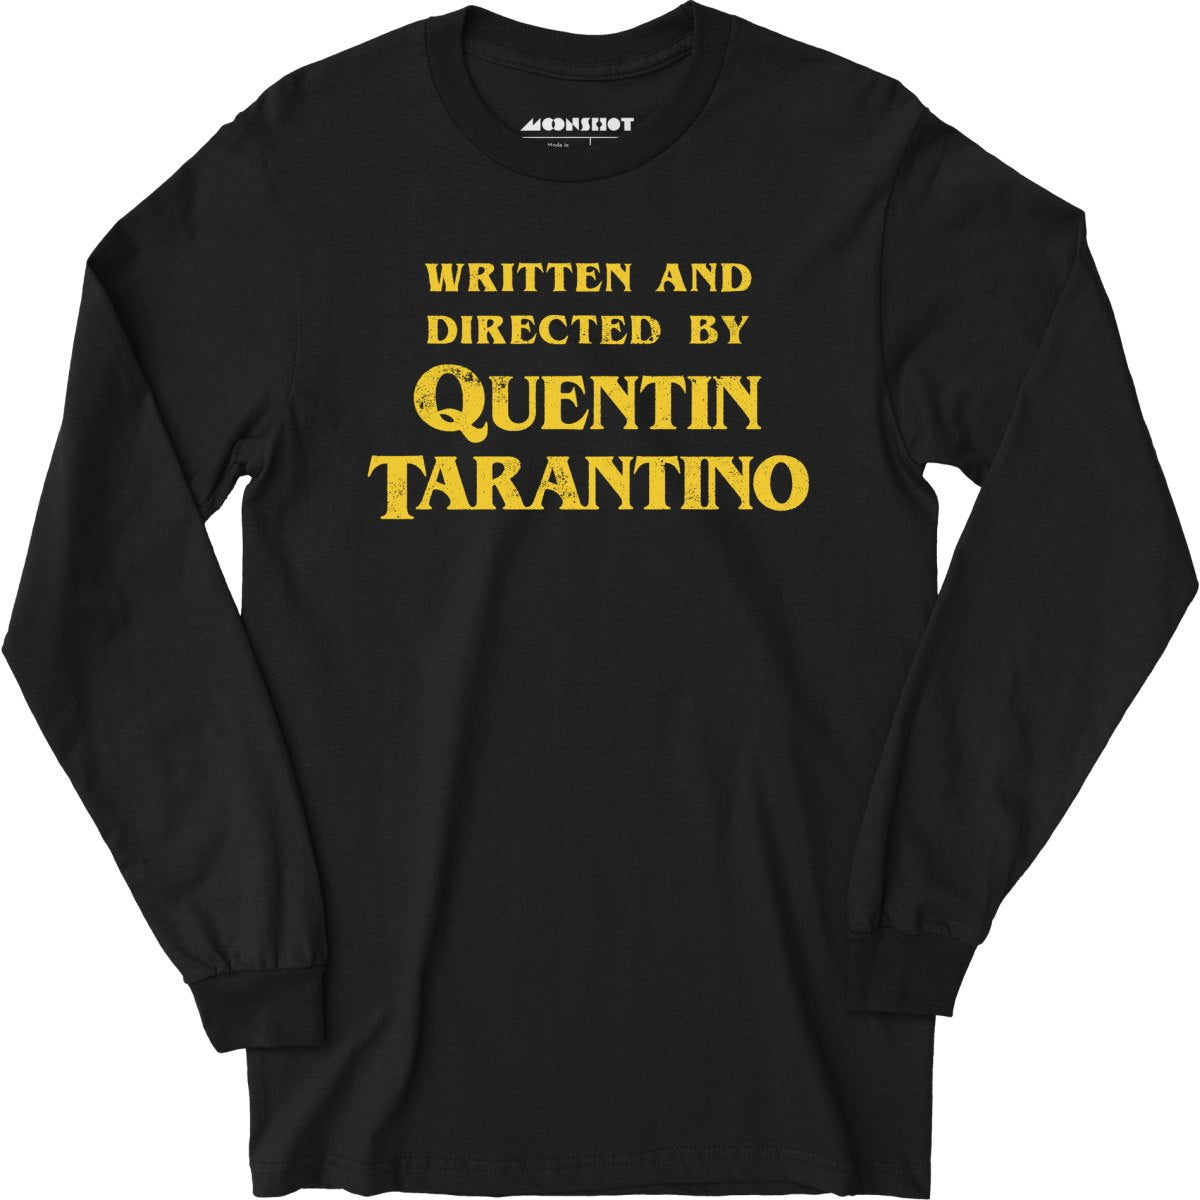 Written and Directed by Quentin Tarantino - Long Sleeve T-Shirt